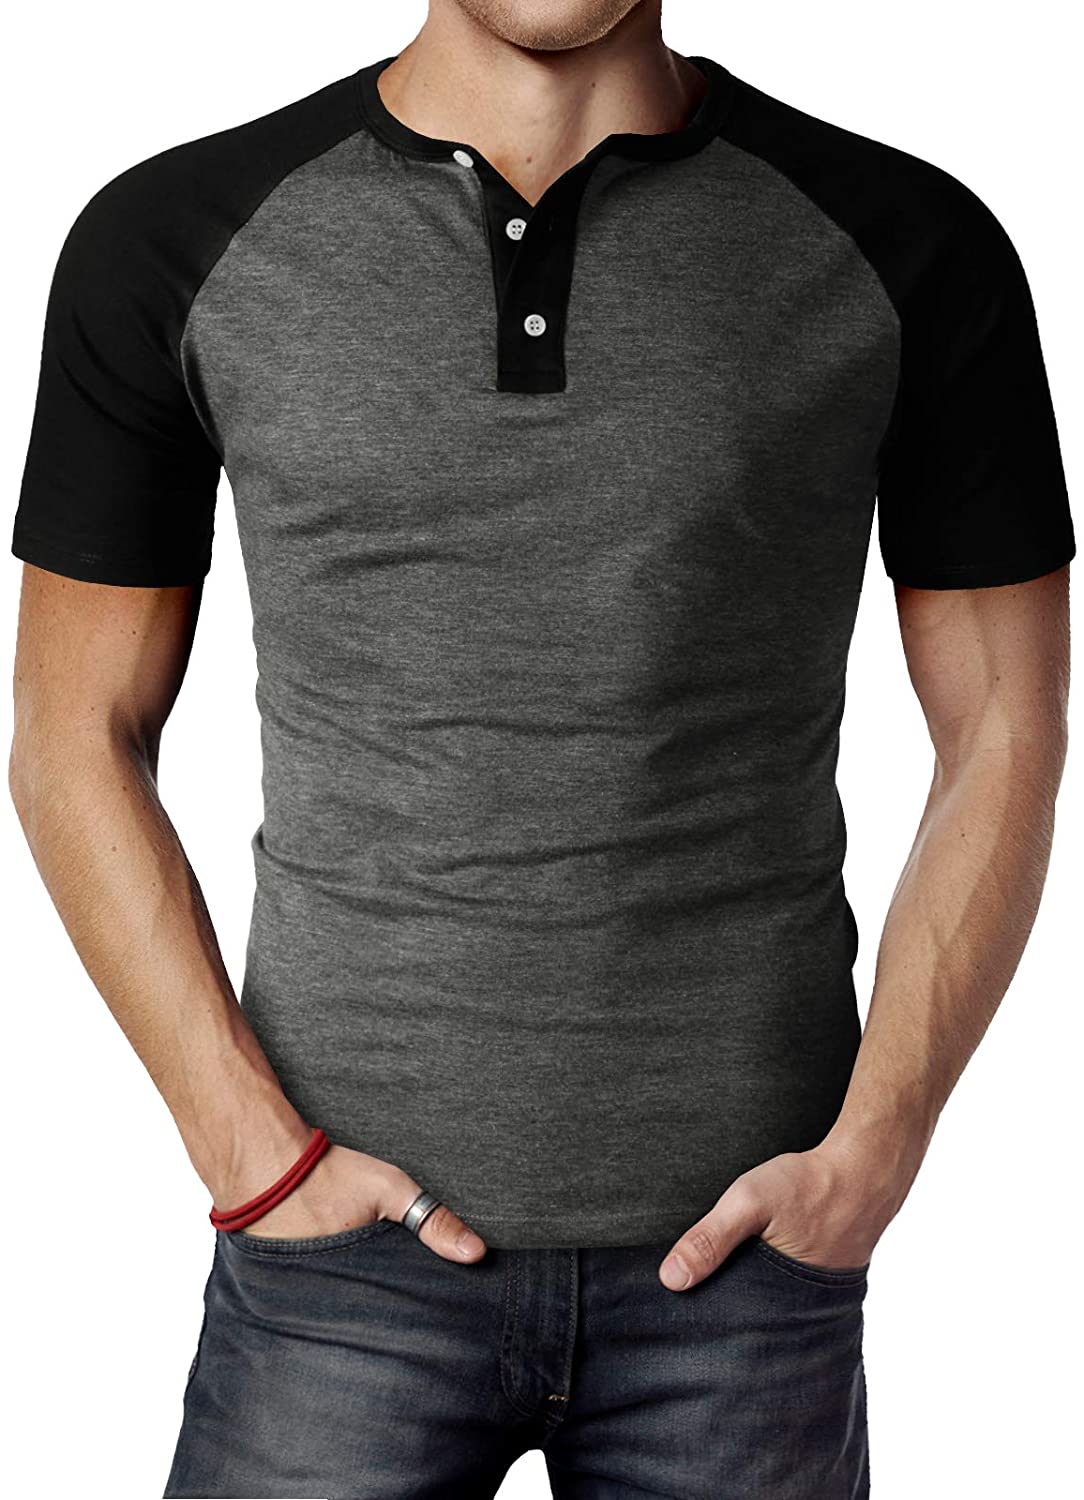 H2H Mens Casual Slim Fit Short Sleeve T-Shirts Lightweight Top Tee 